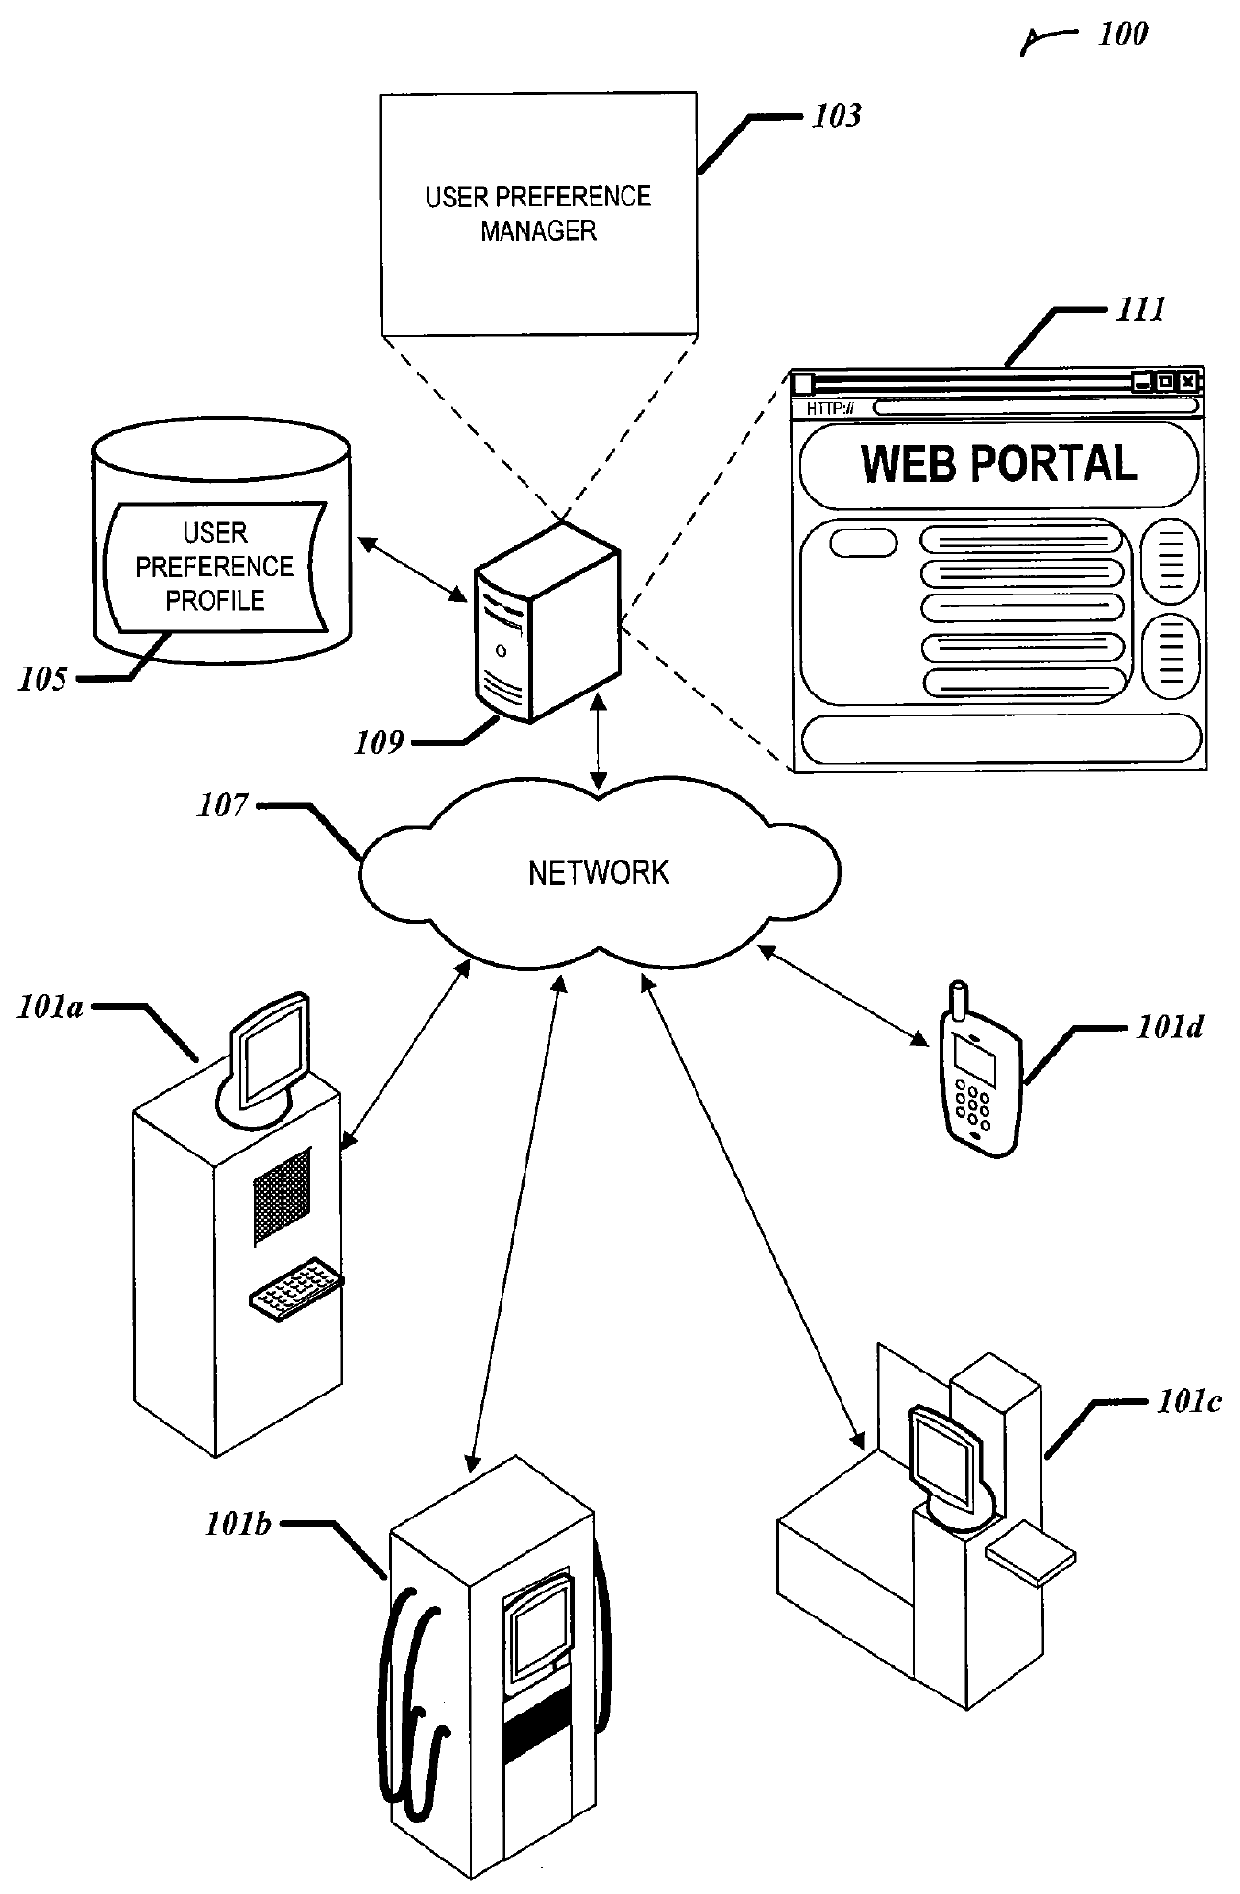 Centralized user preference management for electronic decision making devices